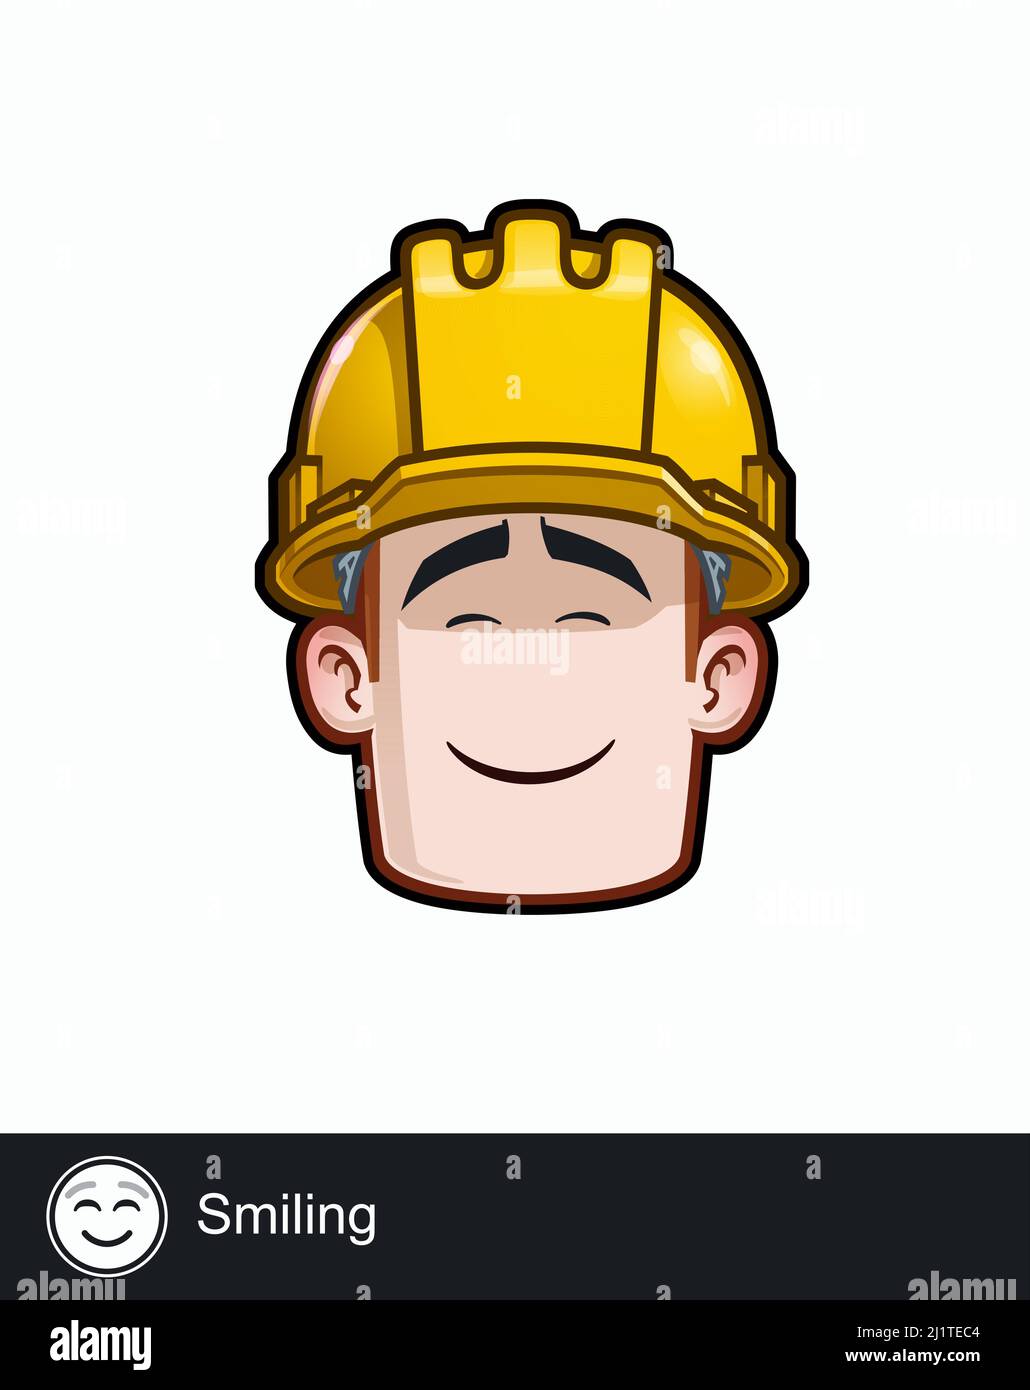 Icon of a construction worker face with Smiling emotional expression. All elements neatly on well described layers and groups. Stock Vector